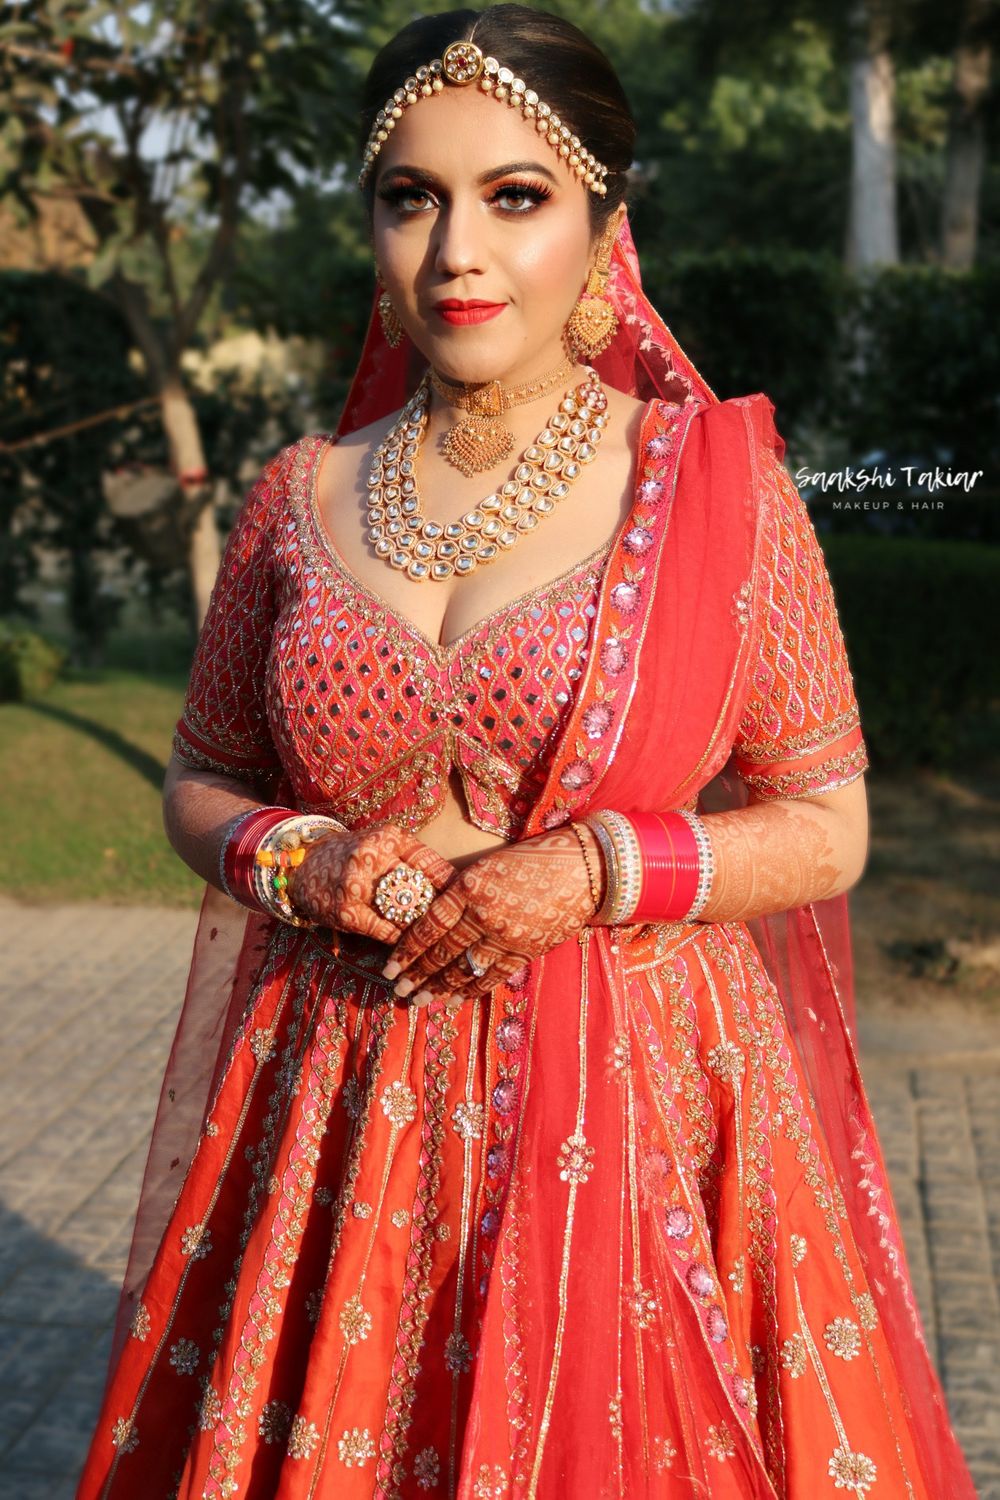 Photo From Elegant Bride Pavni - By Makeup by Saakshi Takiar